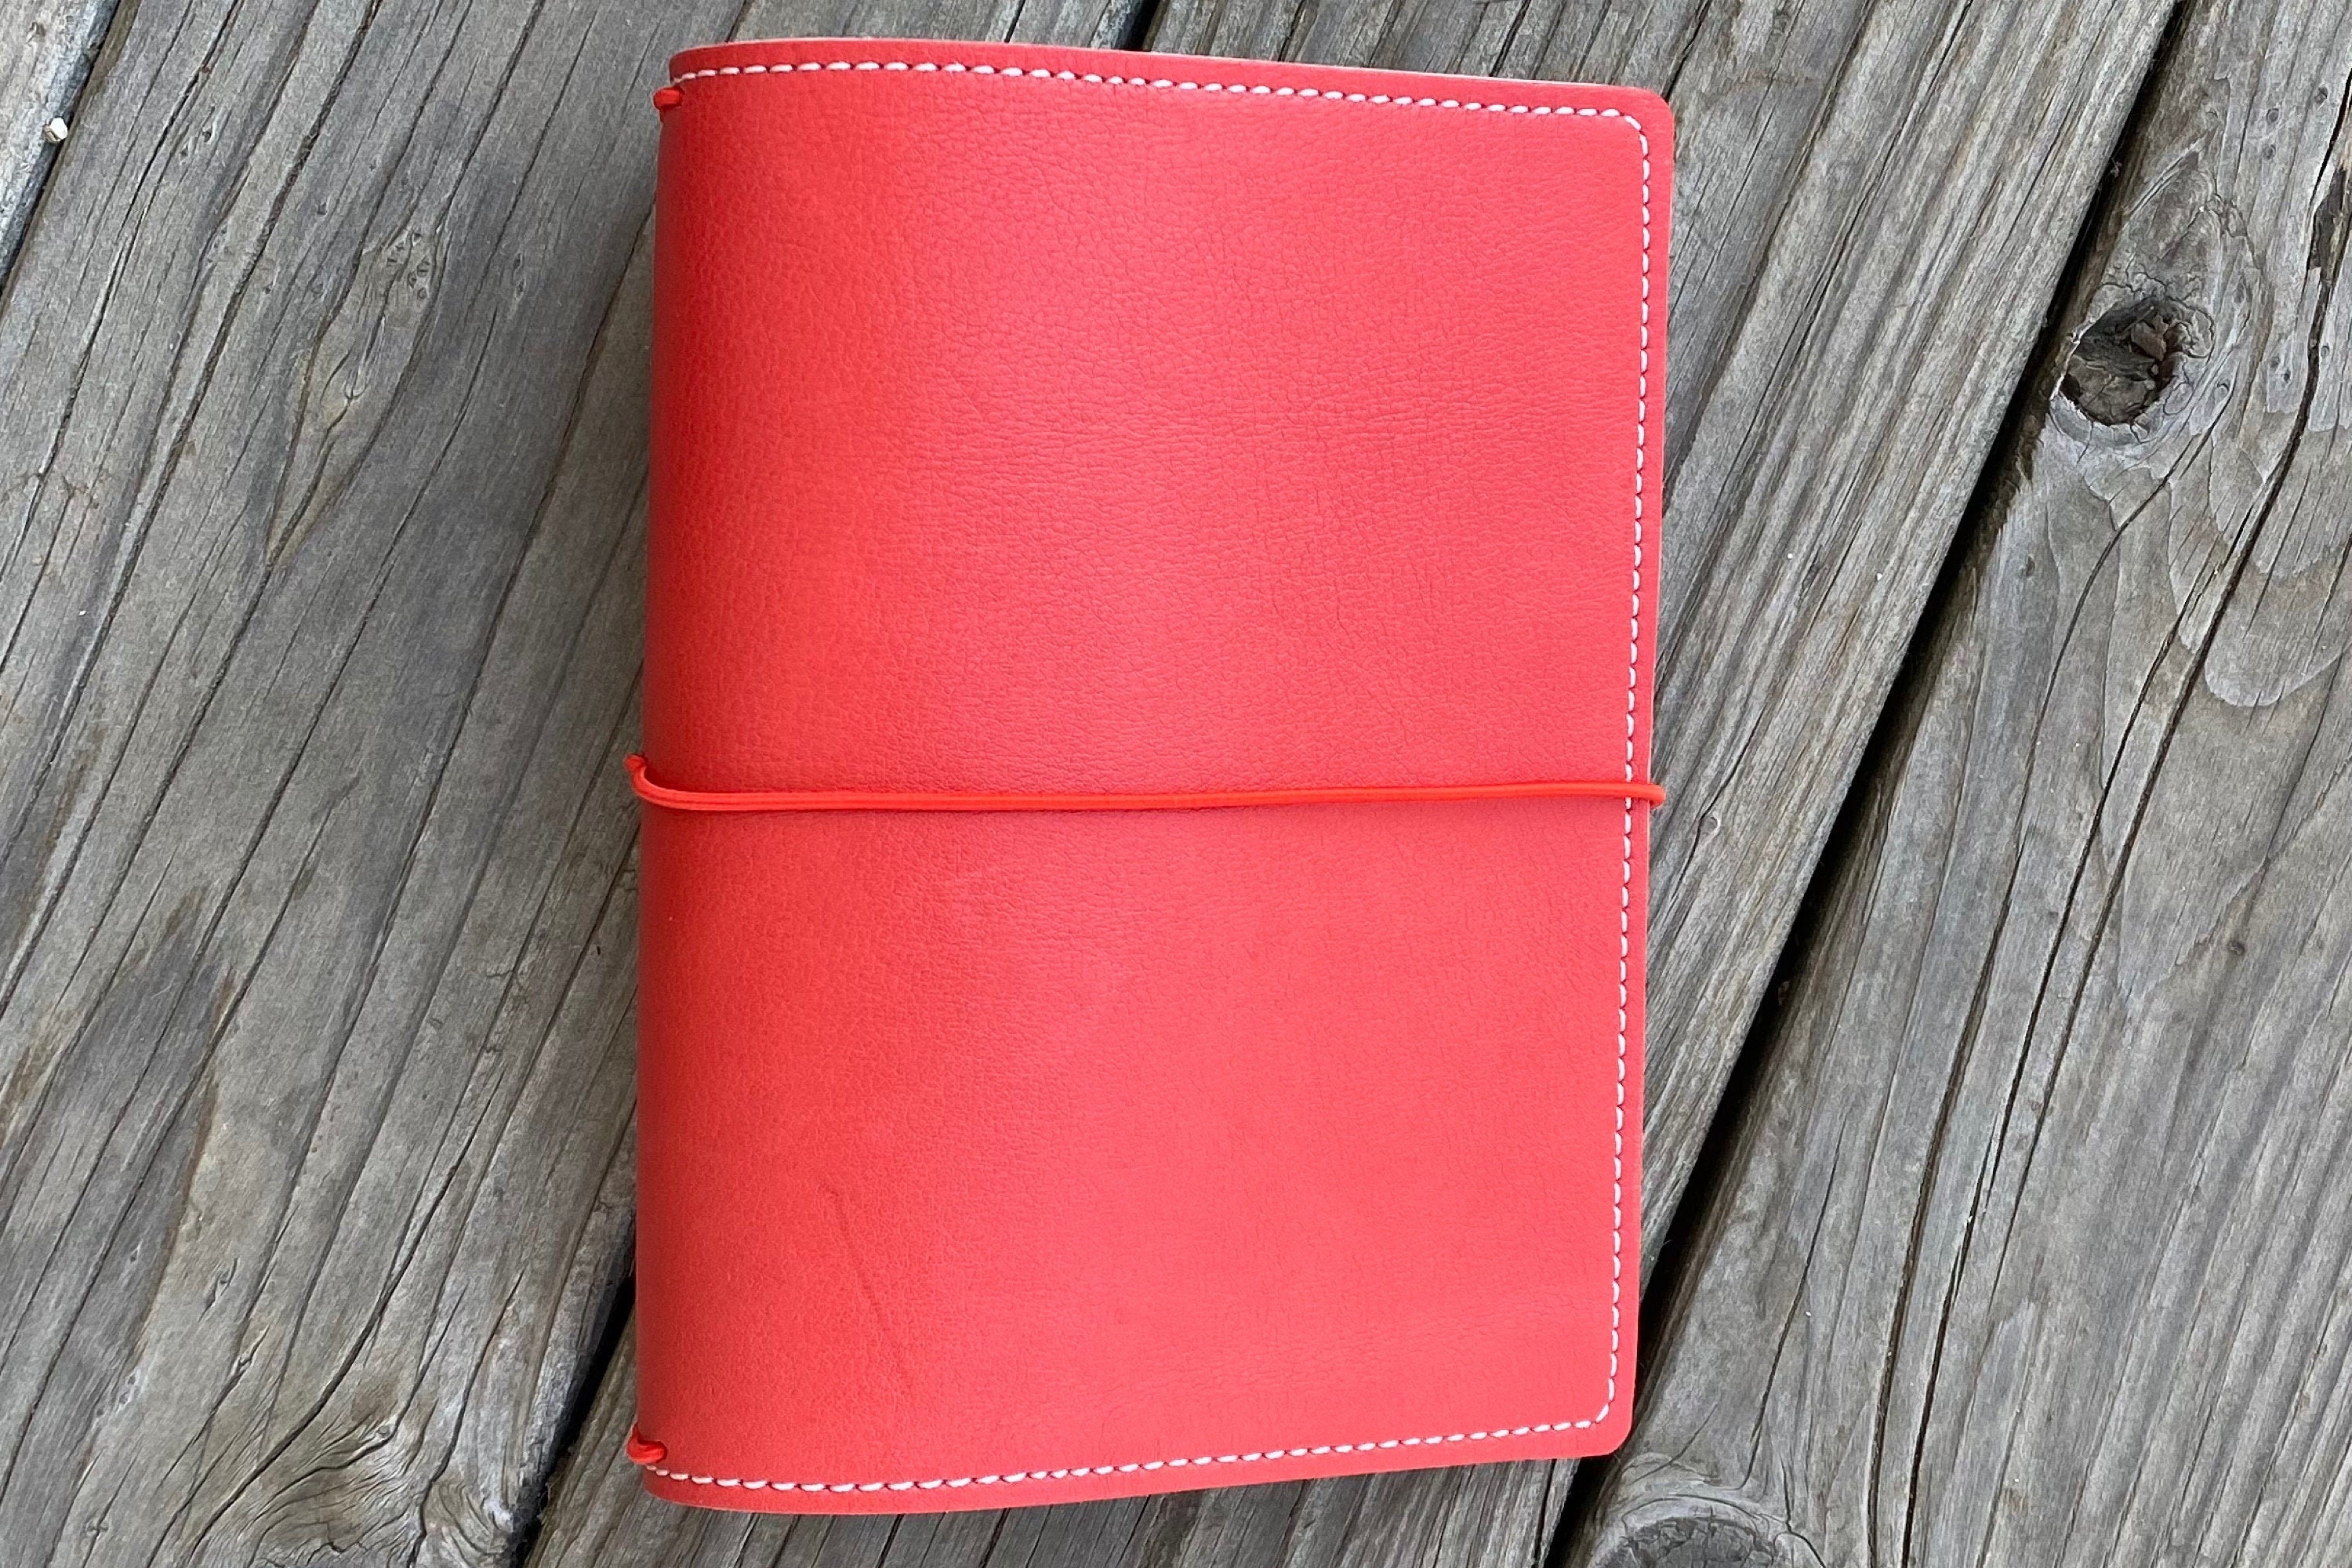 Best Day Planner - Franklin Covey Leather Planner - Red - Euc - Pm